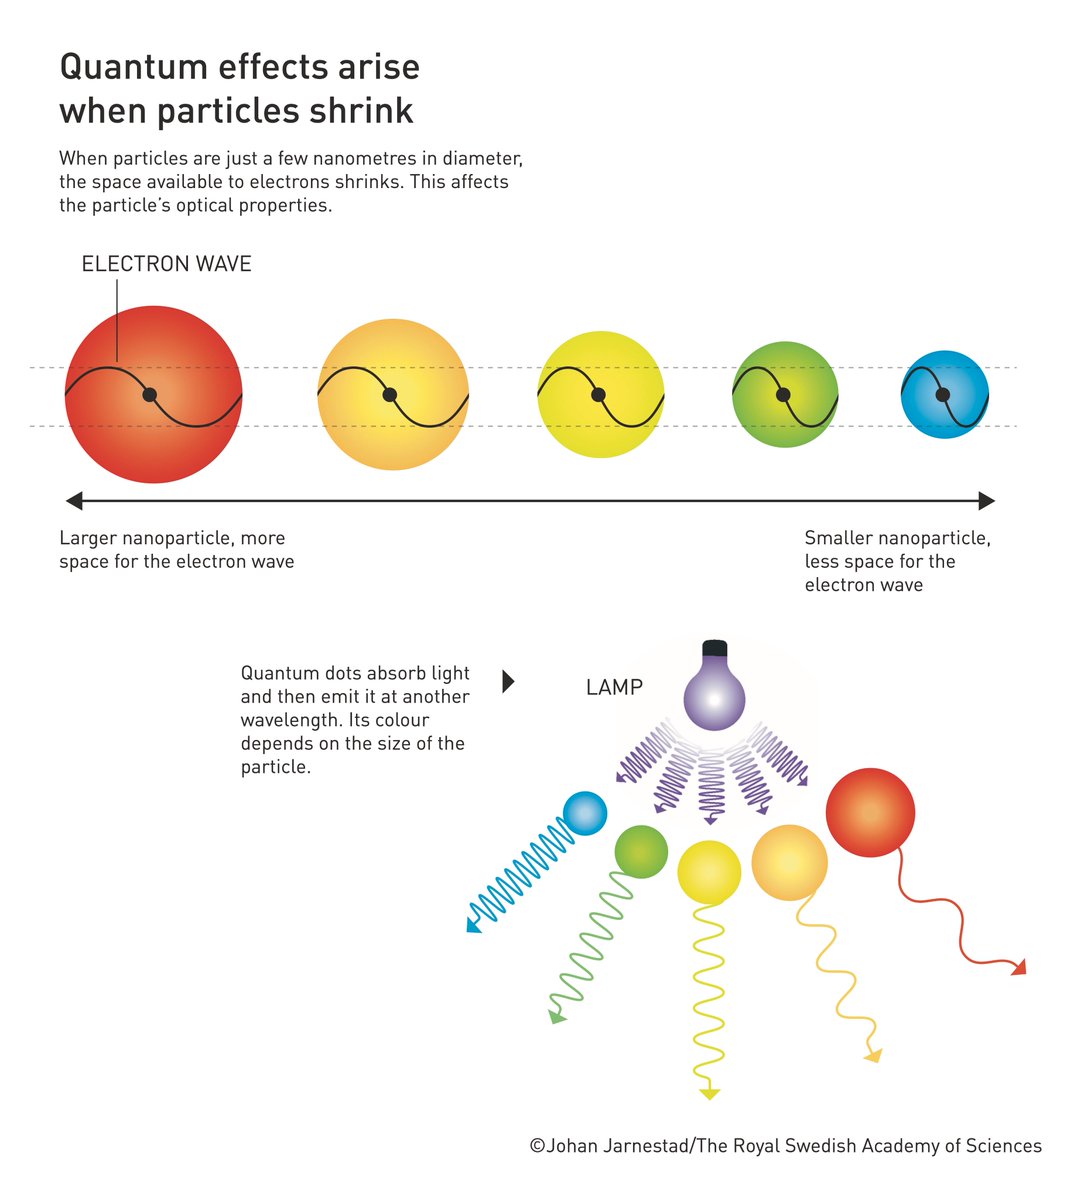 When particles are just a few nanometers in diameter, the space available to the electrons shrink. This affects the particle's optical properties.